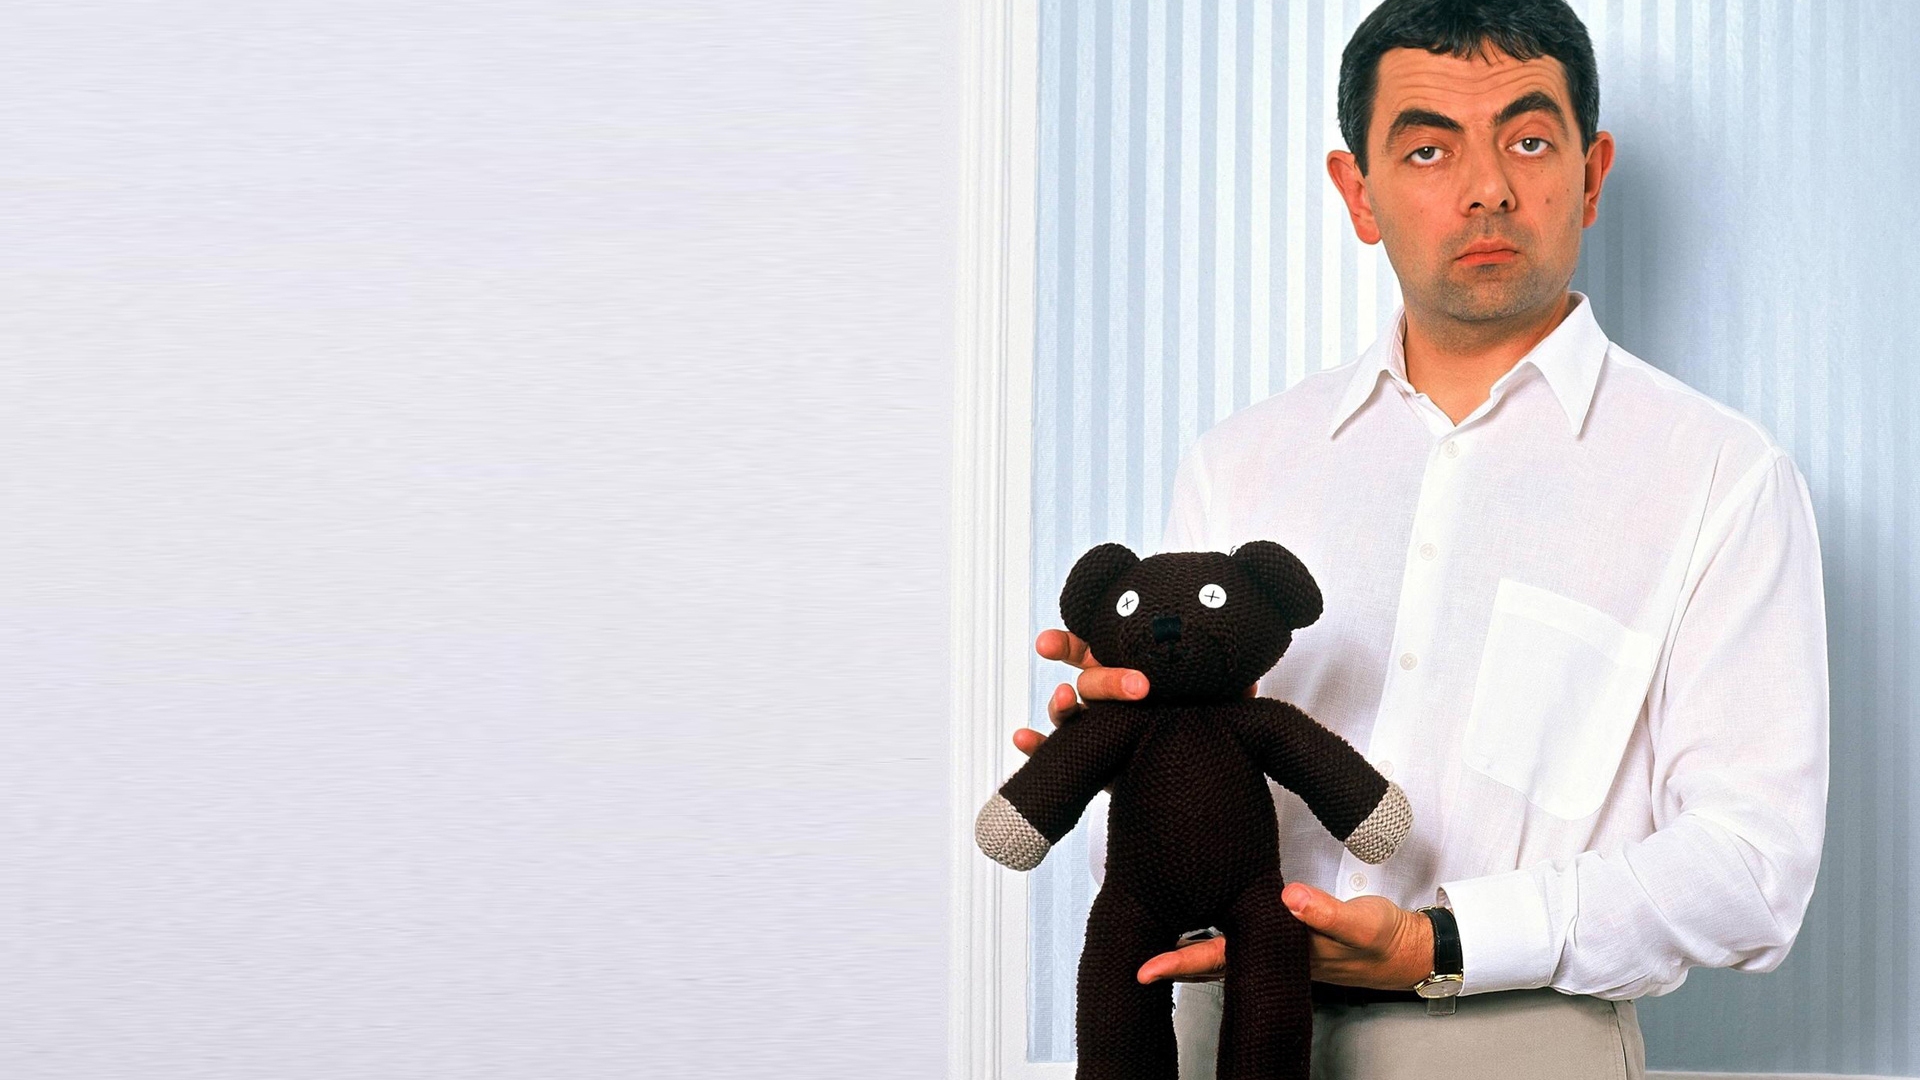 Mr Bean Toy for 1920 x 1080 HDTV 1080p resolution